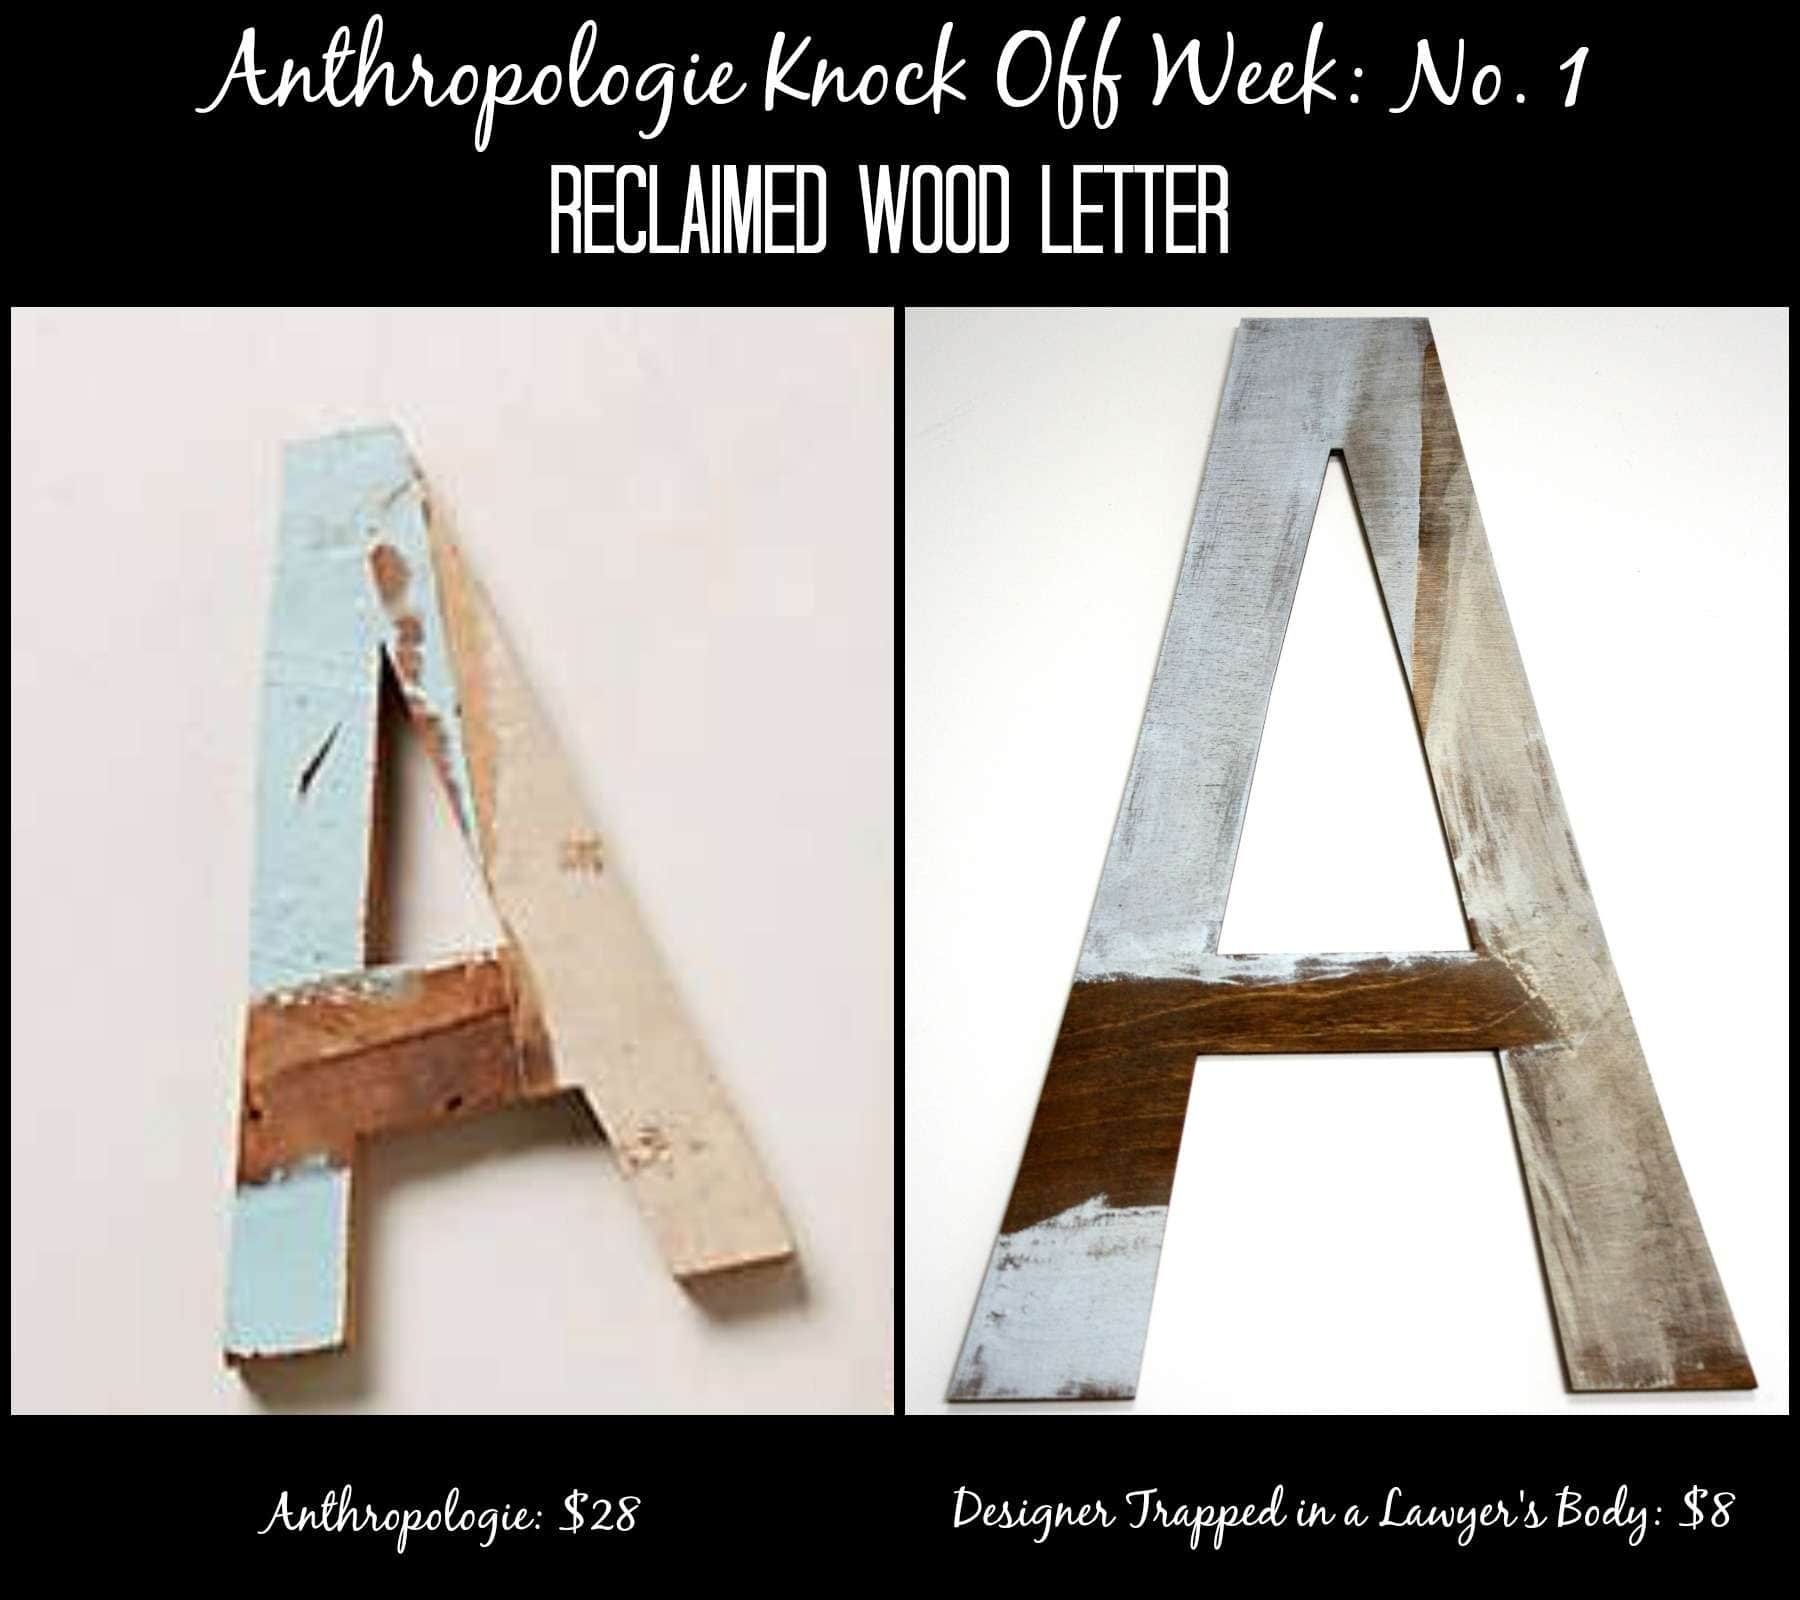 MUST PIN! Awesome Anthropologie Knock Off of a reclaimed wood letter by Designer Trapped in a Lawyer's Body! #anthropologieknockoff